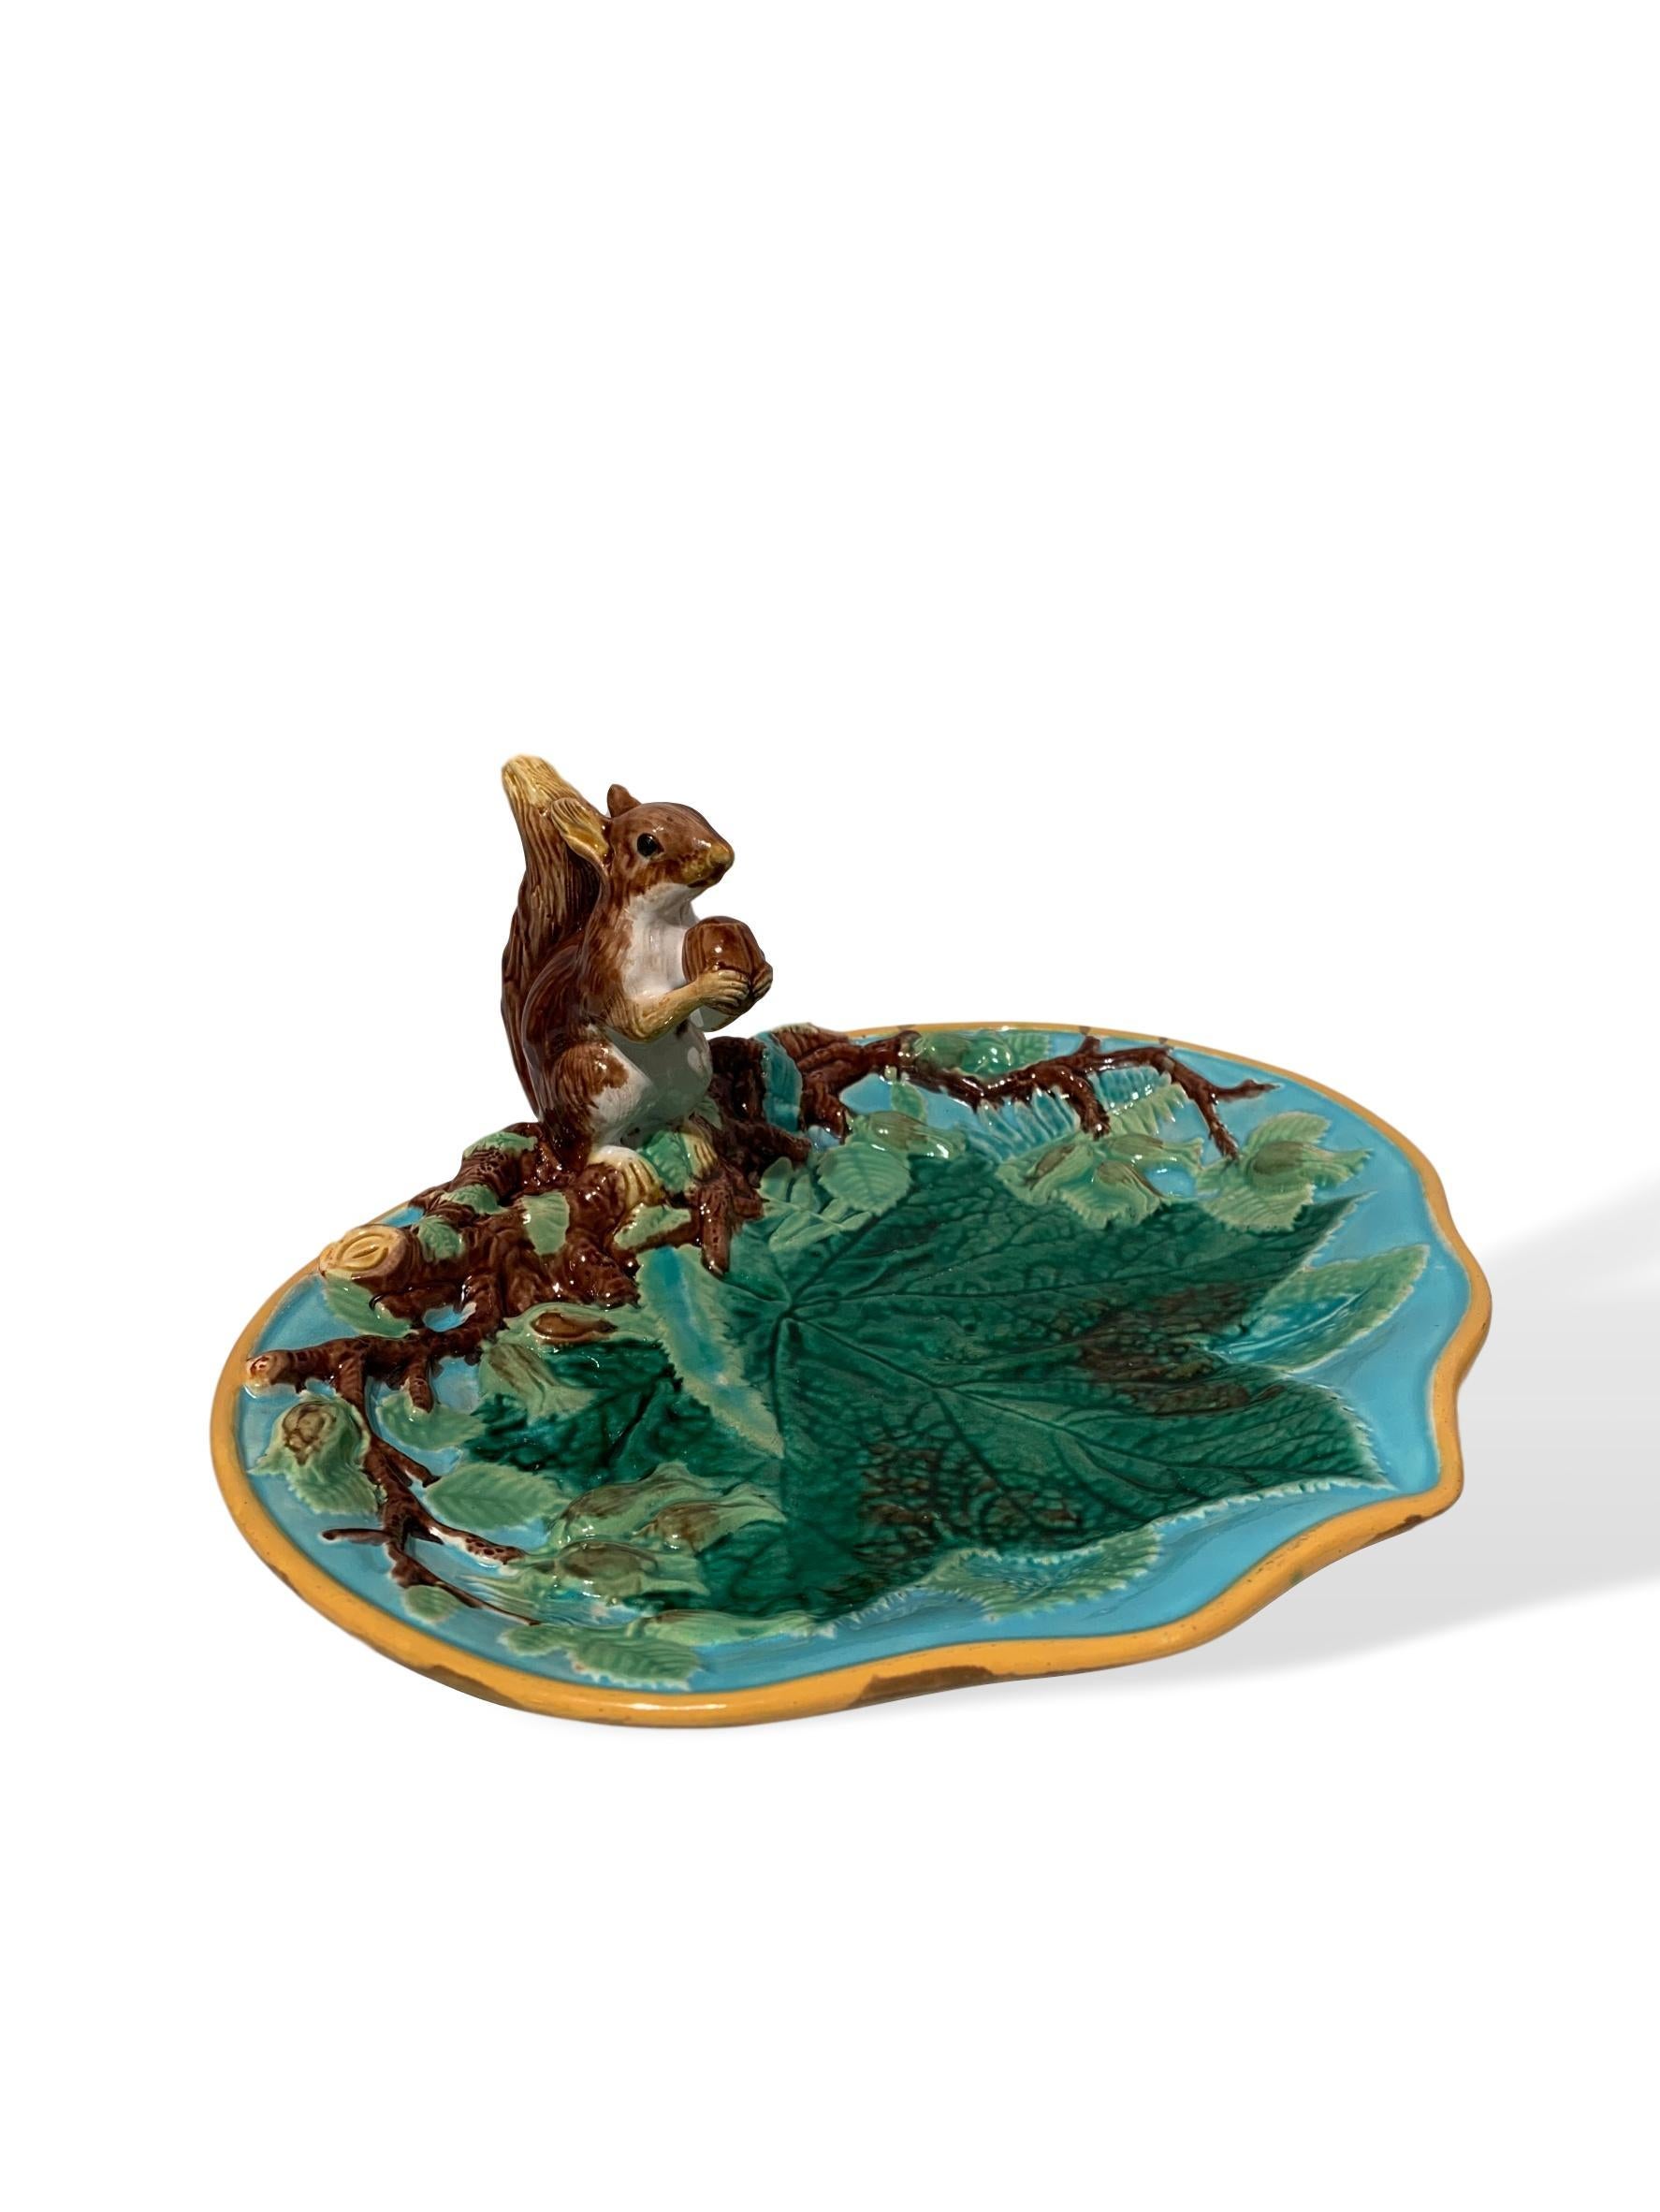 George Jones Majolica squirrel nut dish, English, circa 1869, molded with leaves, ferns, and hazelnut blossoms, with applied naturalistic model of a crouching squirrel with a hazelnut in his mouth. 
British Registry Mark for 22 December 1869,